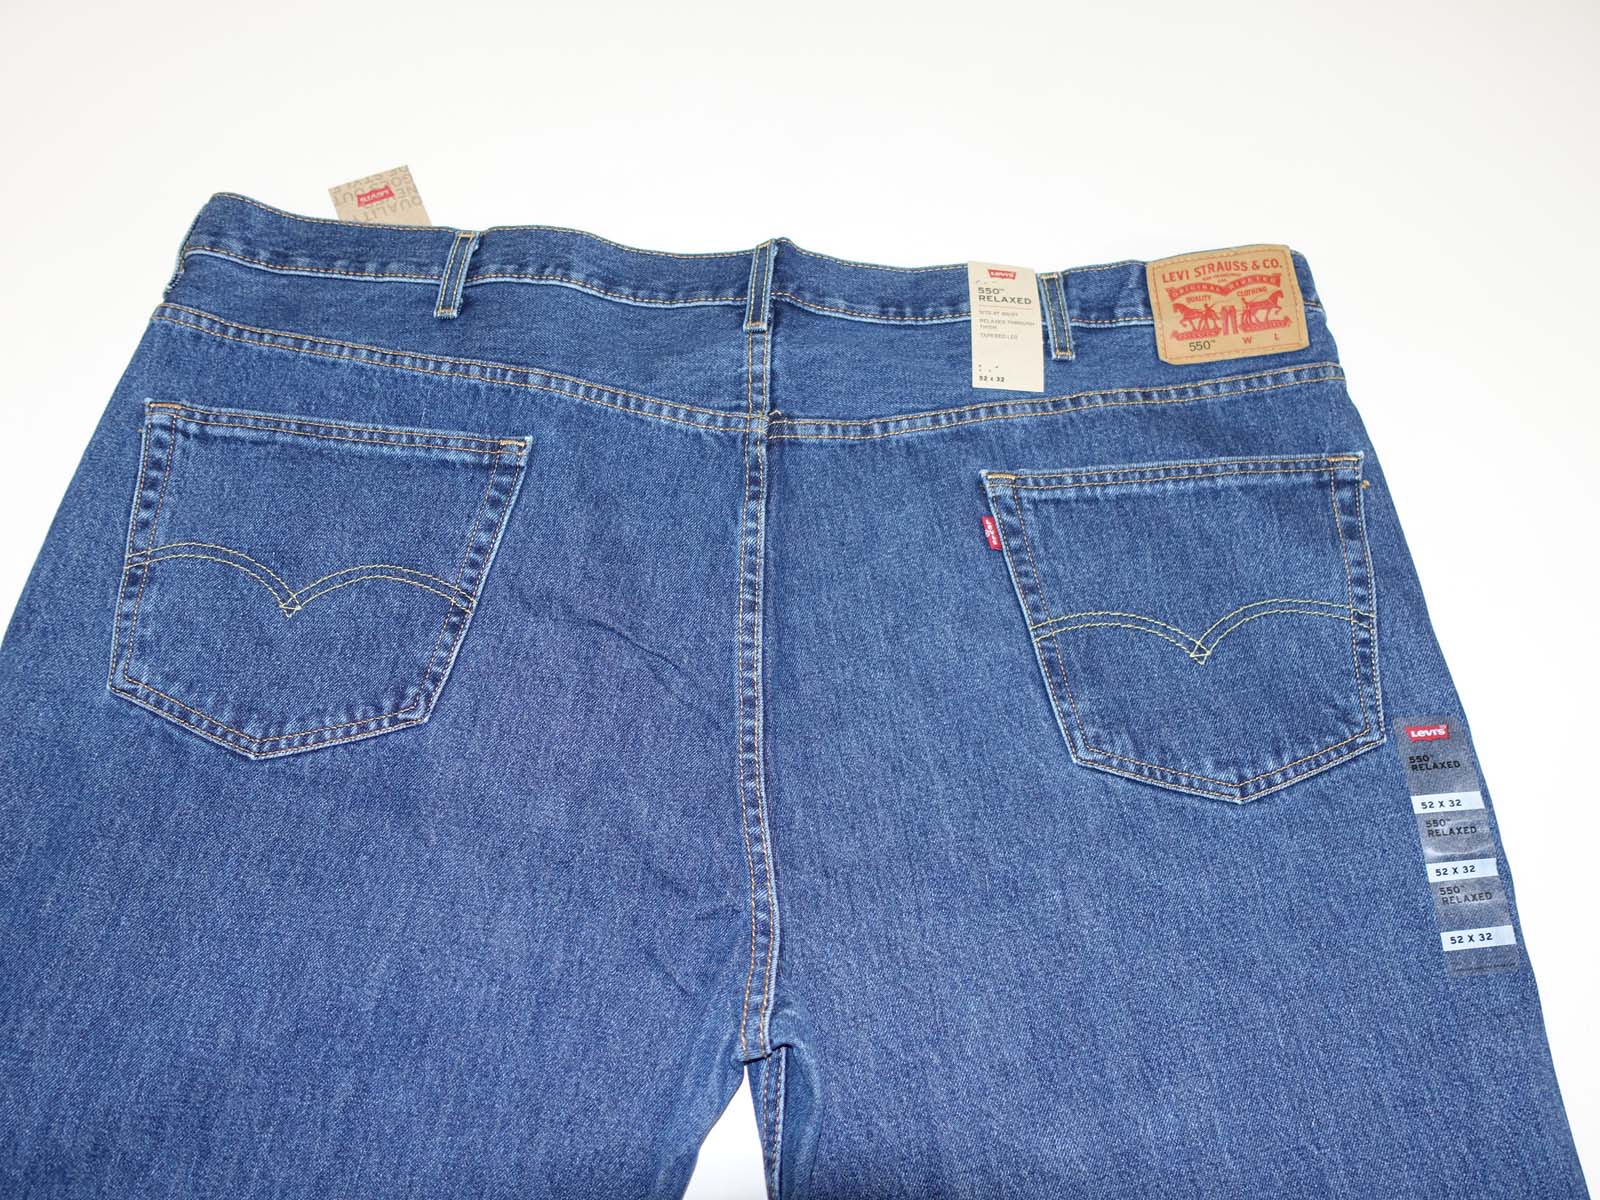 Levi's Men's 550 Relaxed Fit Jeans Size 52 x 32 NWT High Rise Blue Denim Red Tab | eBay